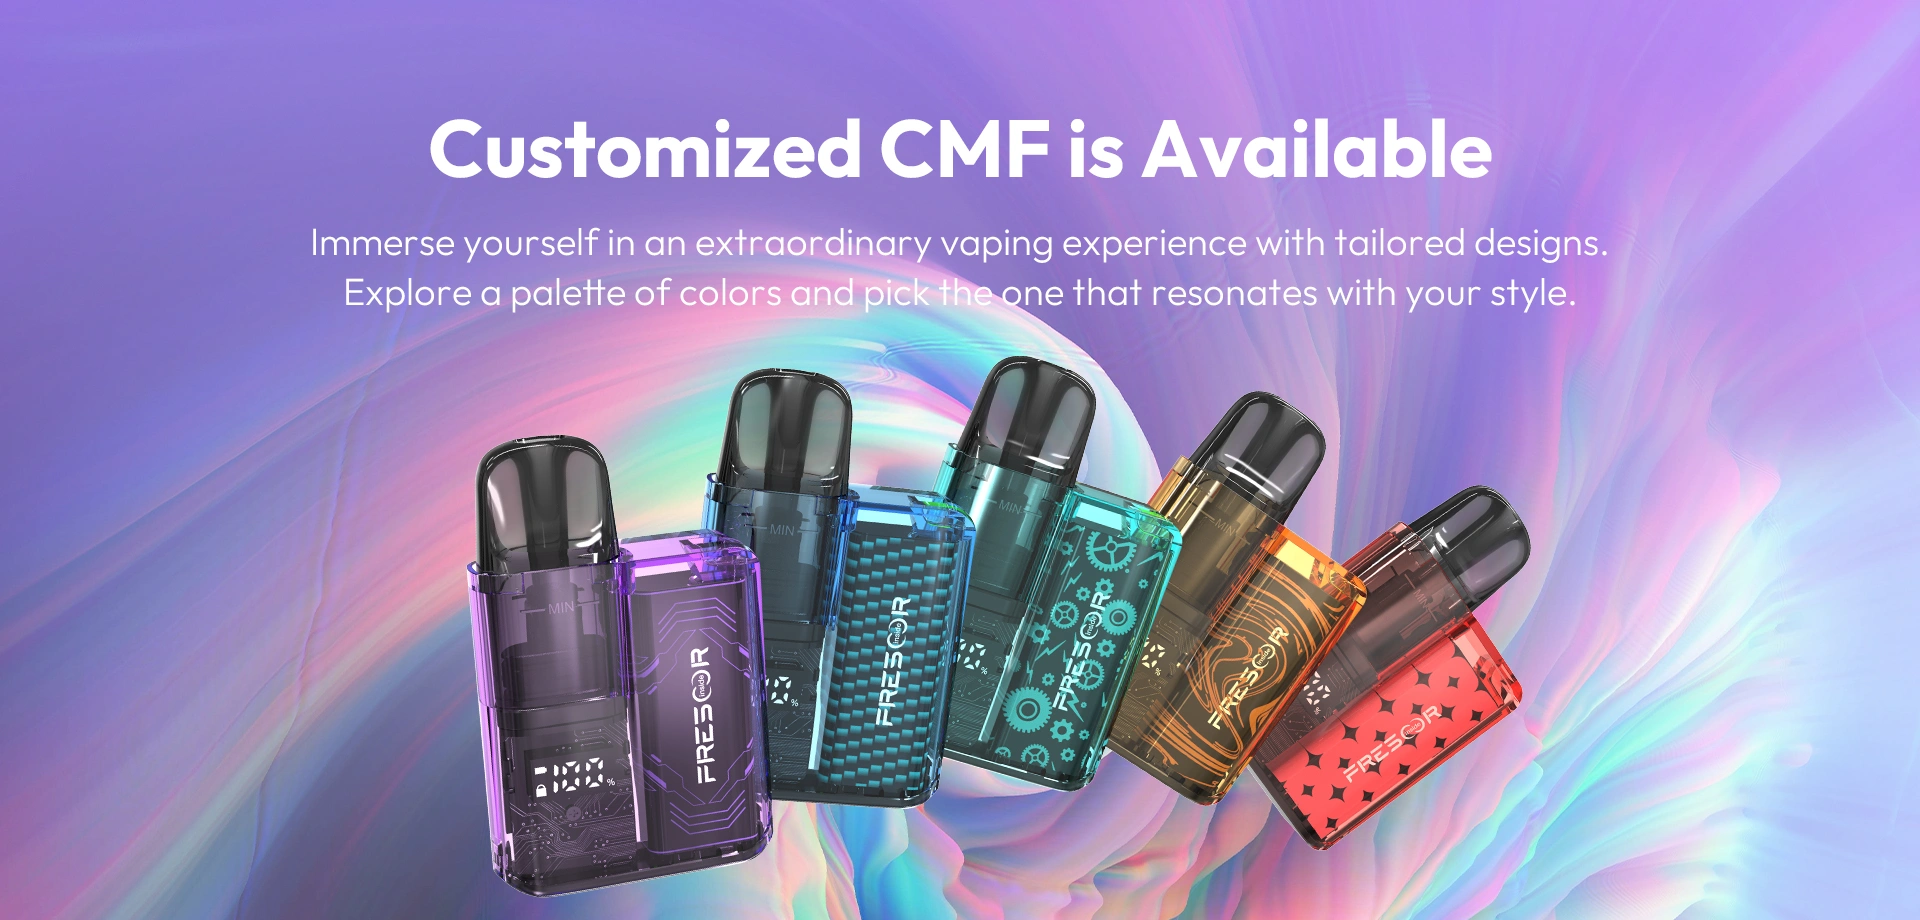 Customized CMF is Available lmmerse yourself in an extraordinary vaping experience with tailored designs. Explore a palette of colors and pick the one that resonates with your style.